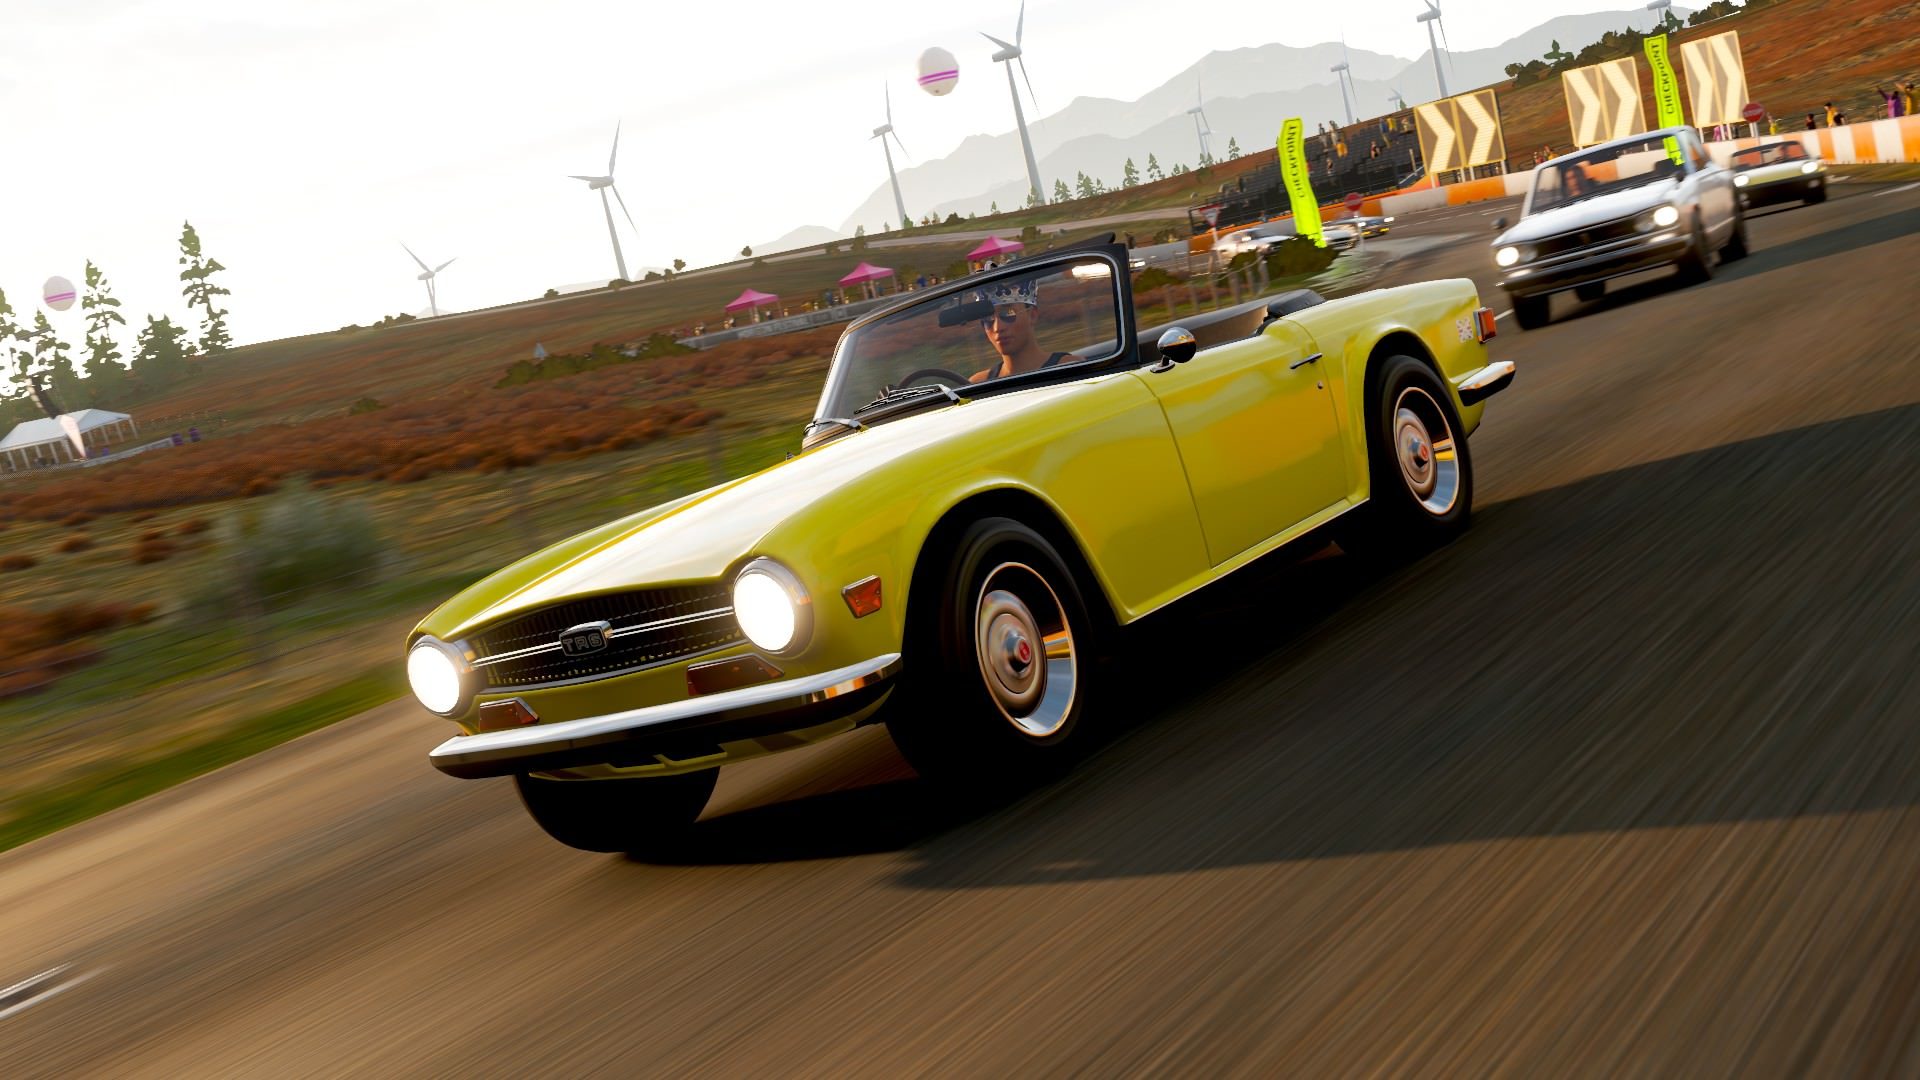 There's also a bunch of old British convertible cars in this game